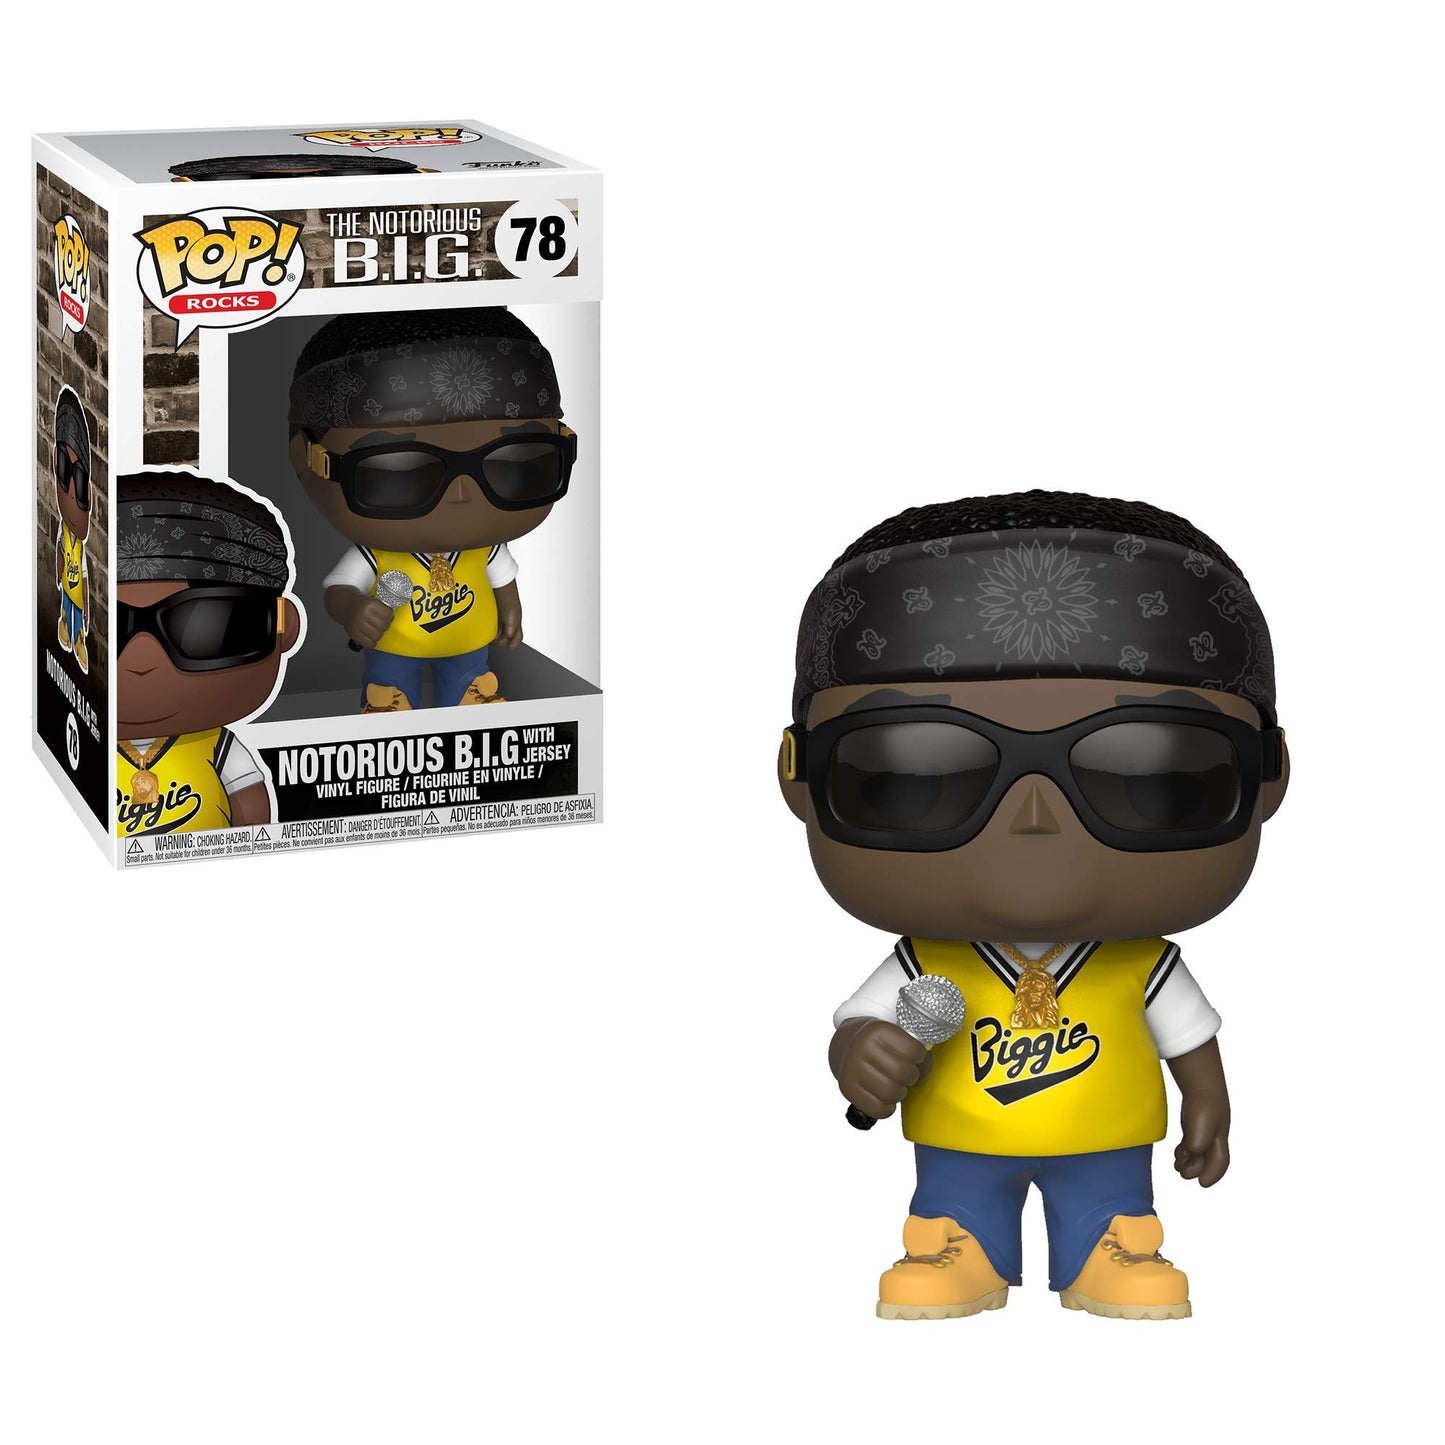 Funko POP! Rocks Notorious B.I.G. - Notorious B.I.G. with Jersey #78